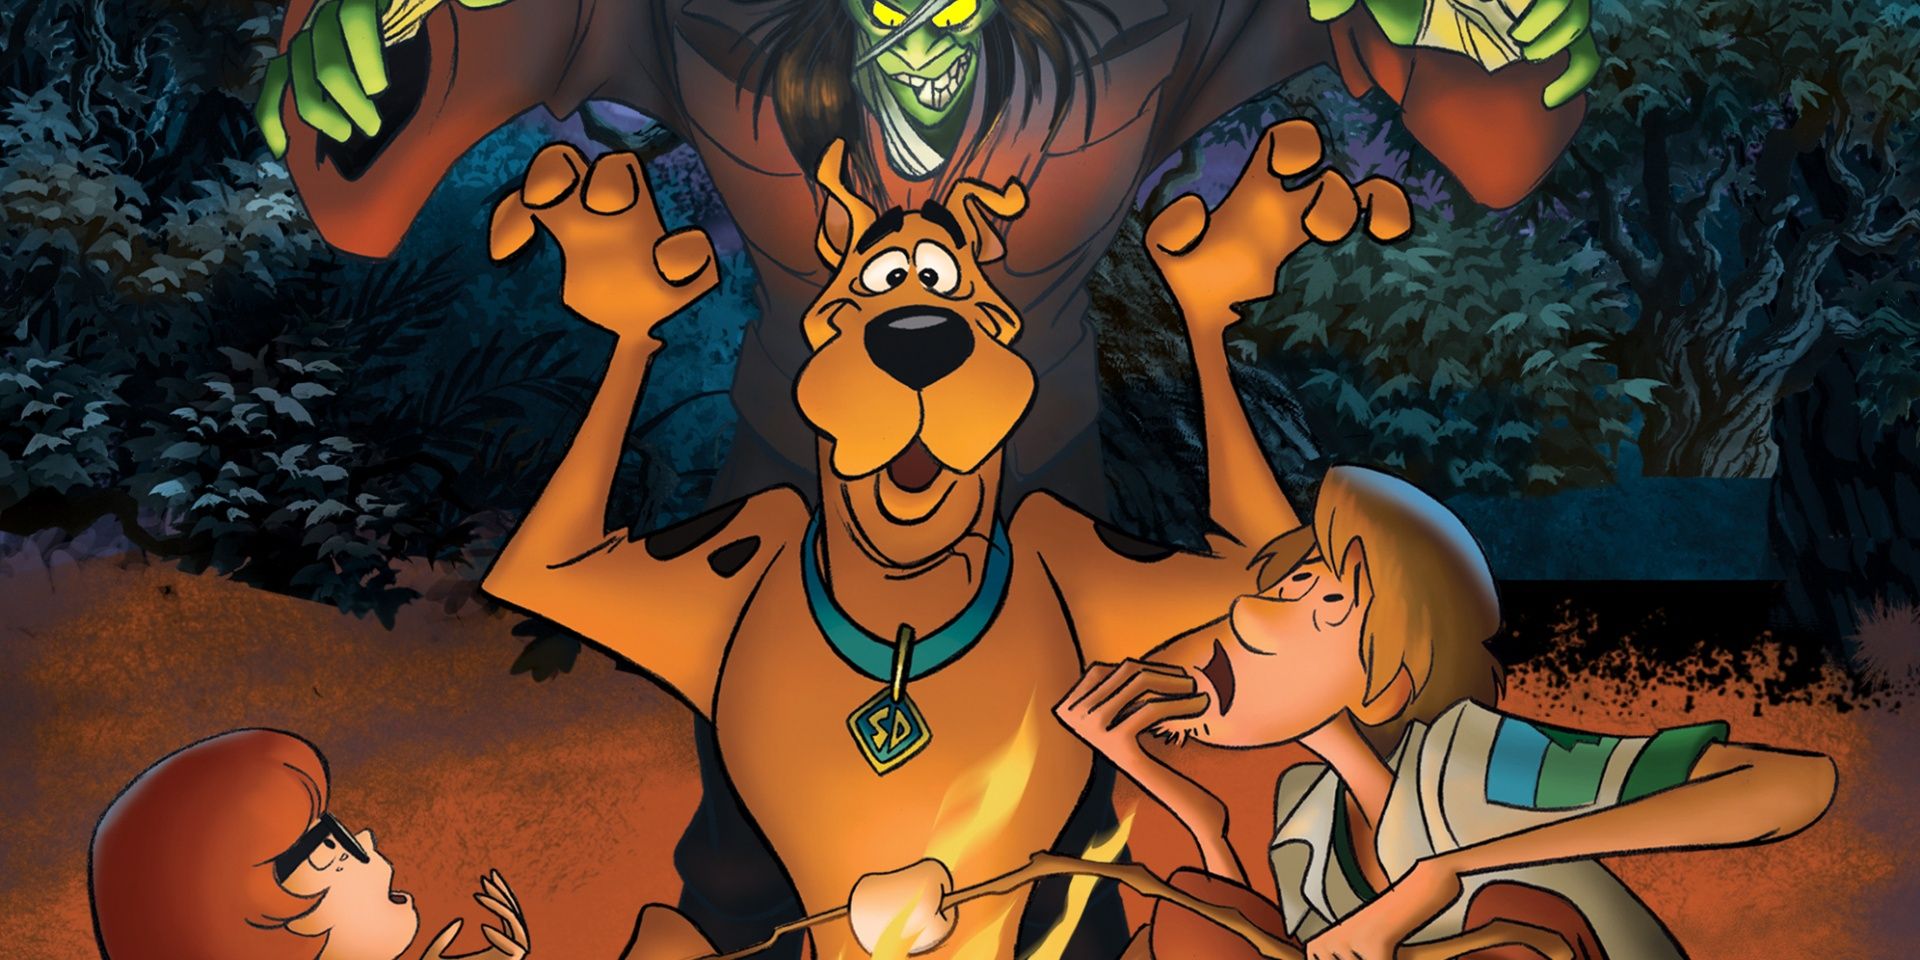 The cover of Scooby Doo Camp Scare.